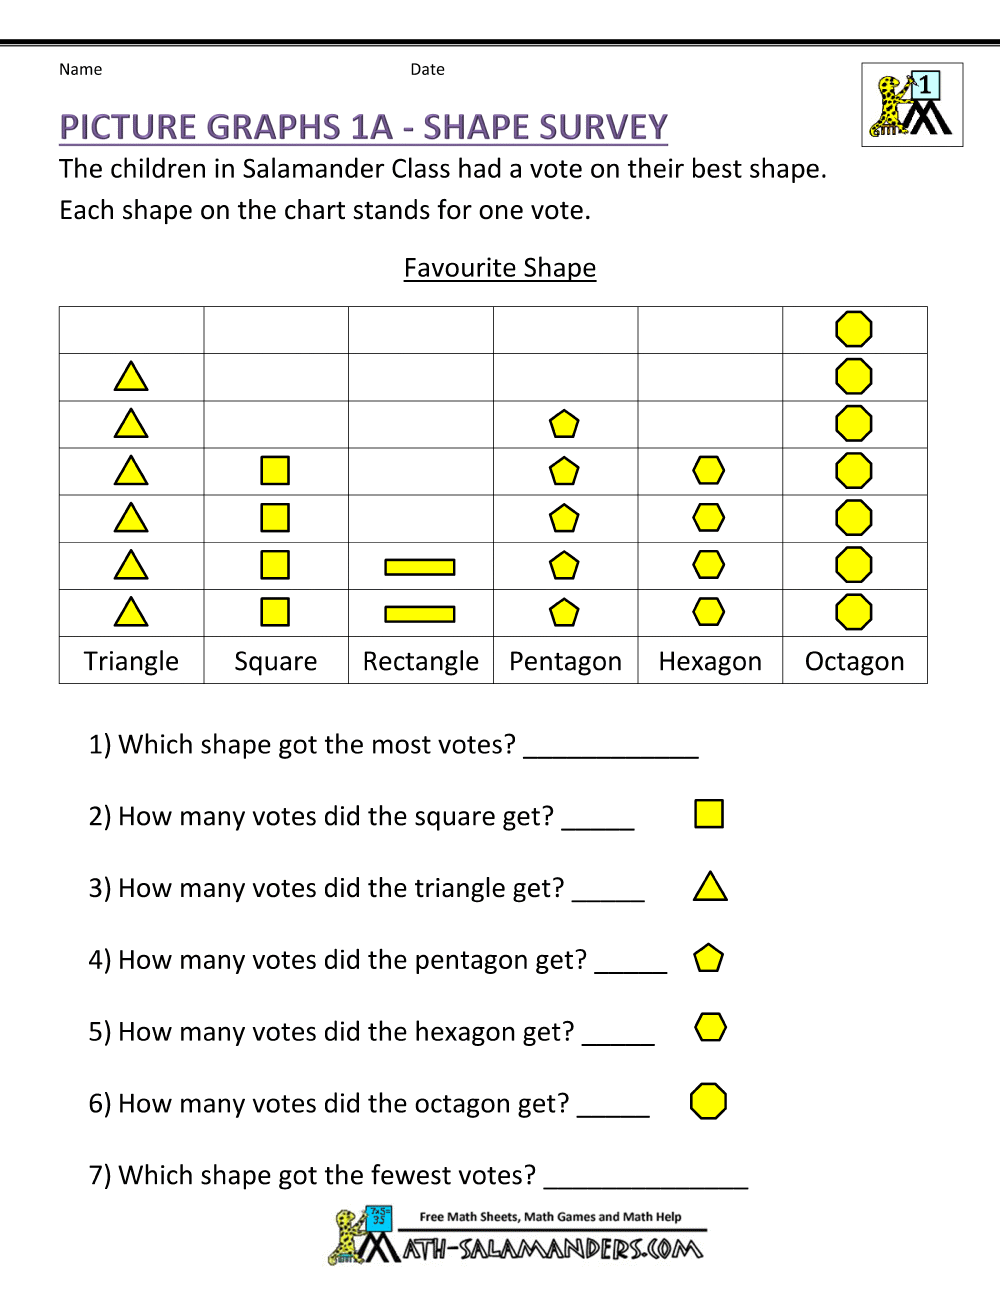 Math Worksheets Graphing Data - graphing data worksheets free